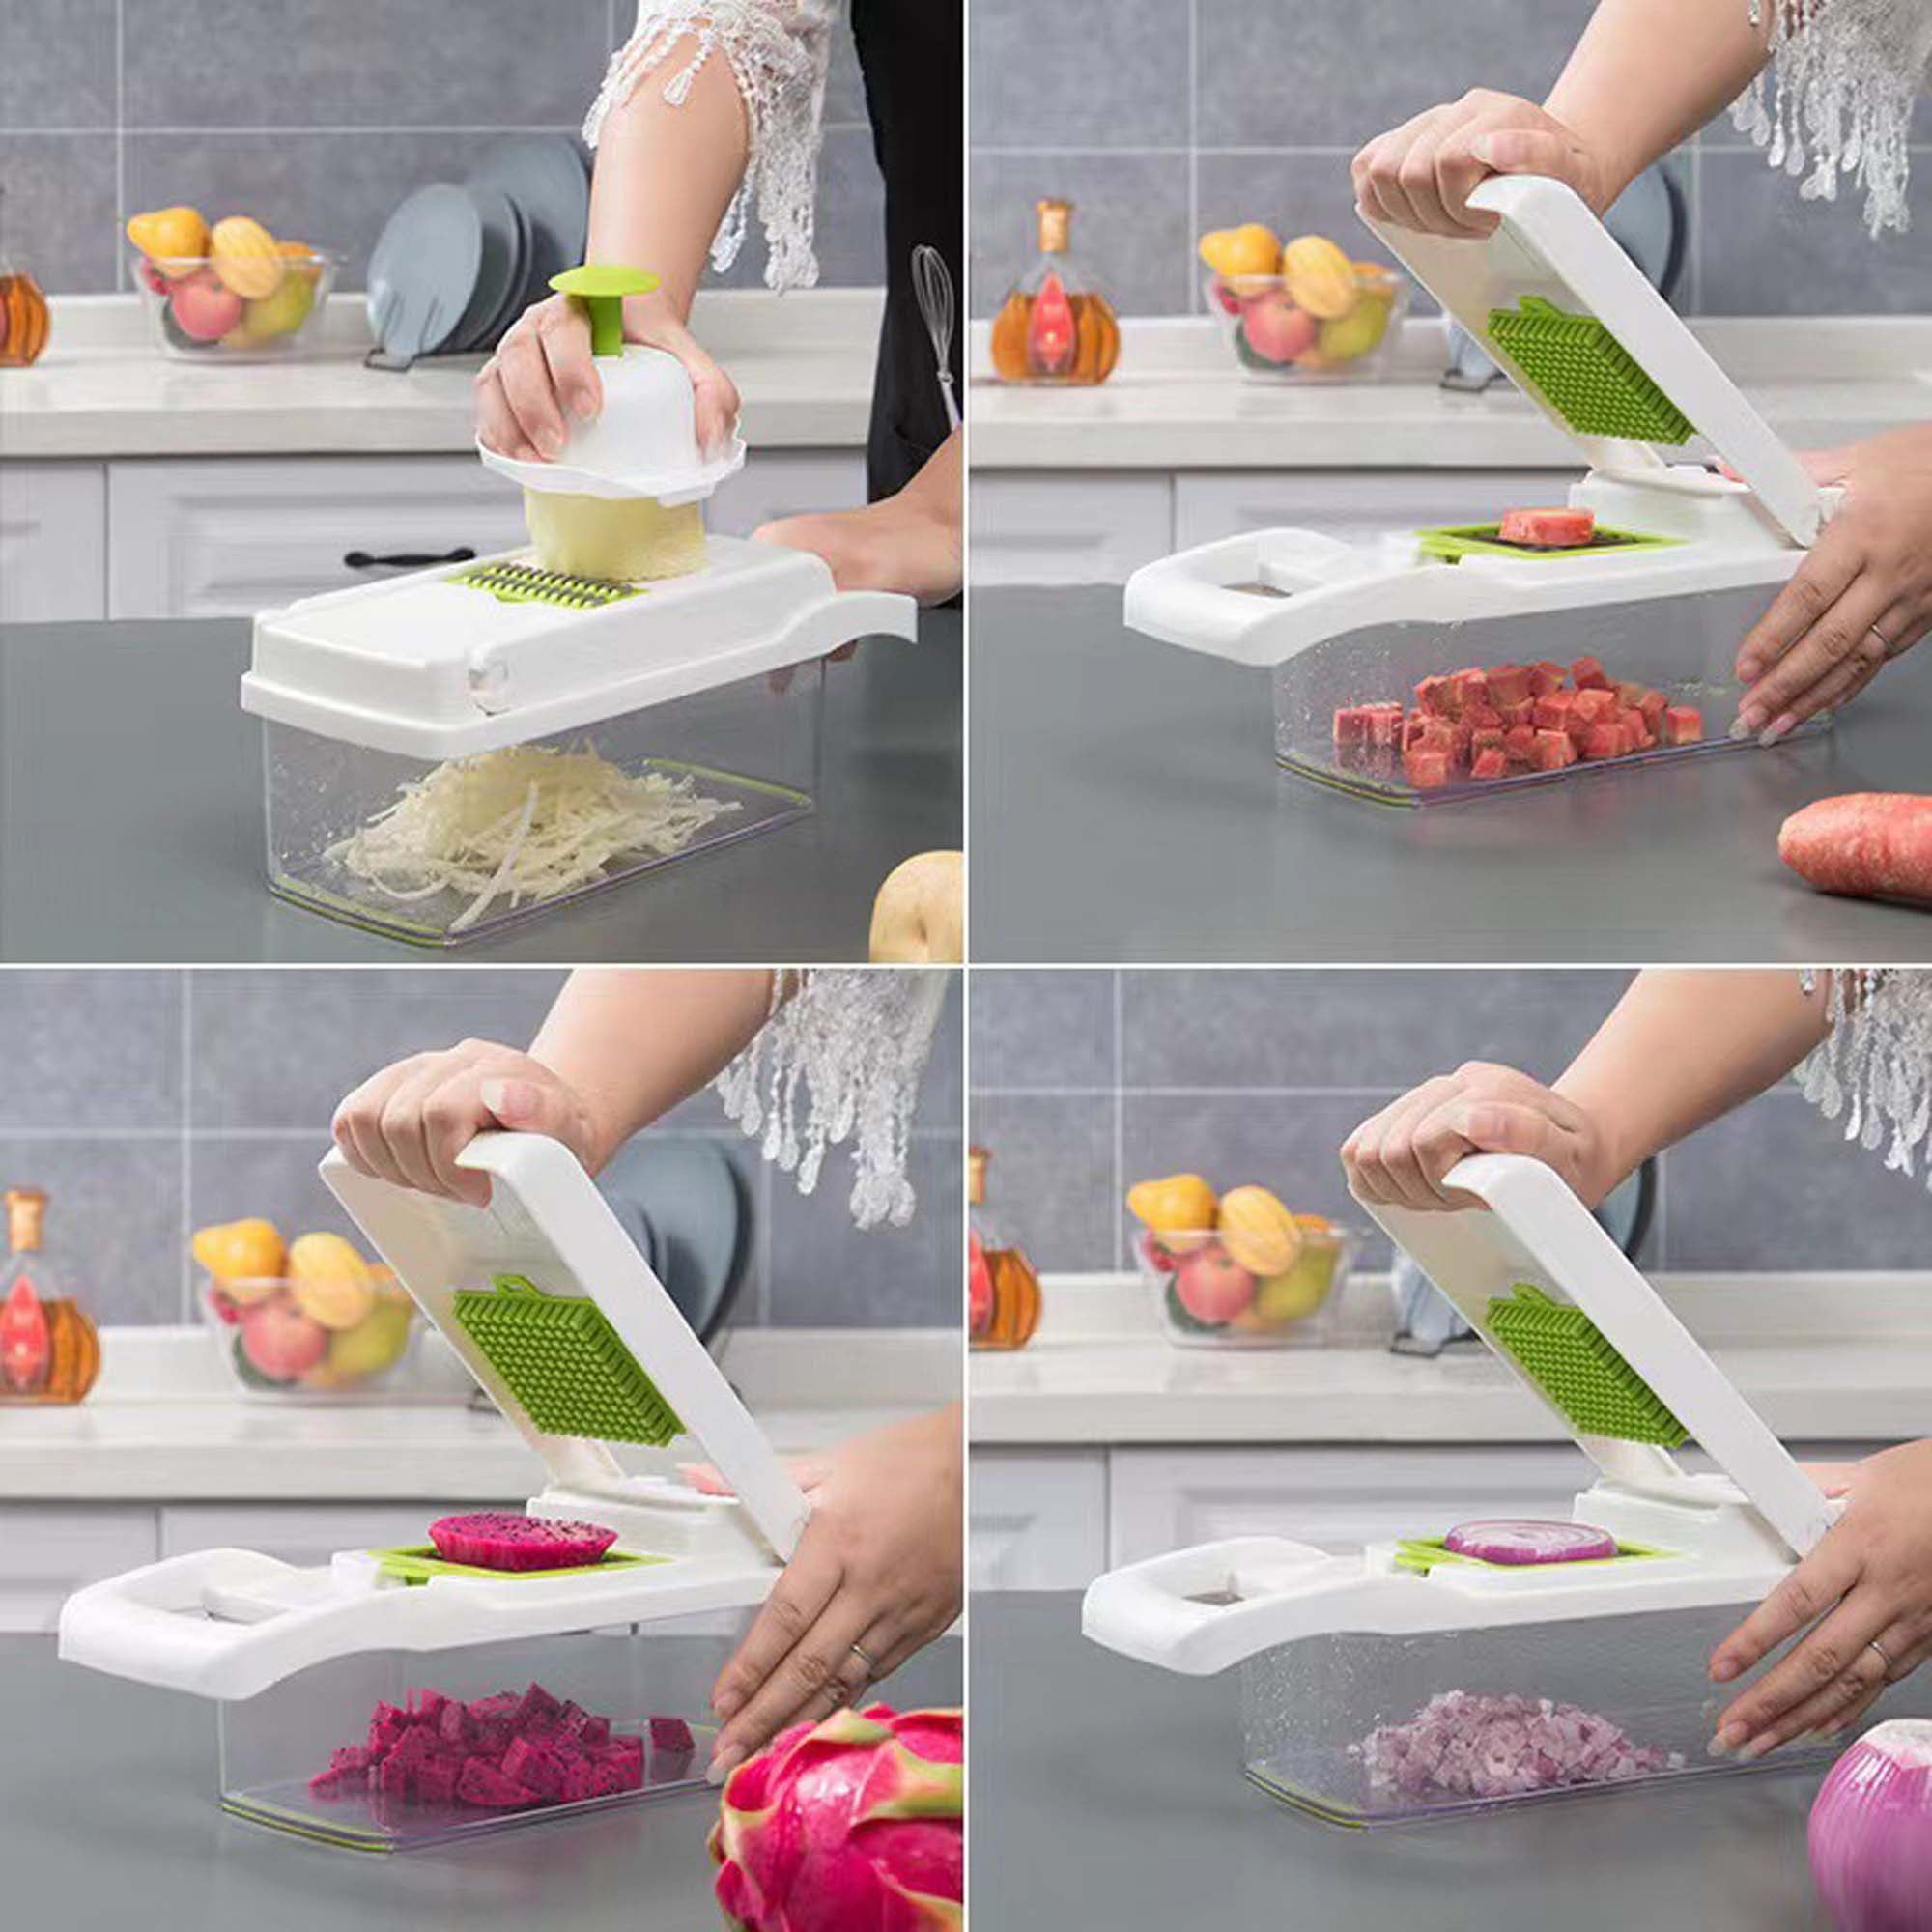 Multifunctional 13 in 1 Vegetable Chopper, Pro Onion Chopper，Kitchen  Vegetable Slicer Dicer Cutter,Veggie Chopper With 8 Blades,Carrot and  Garlic